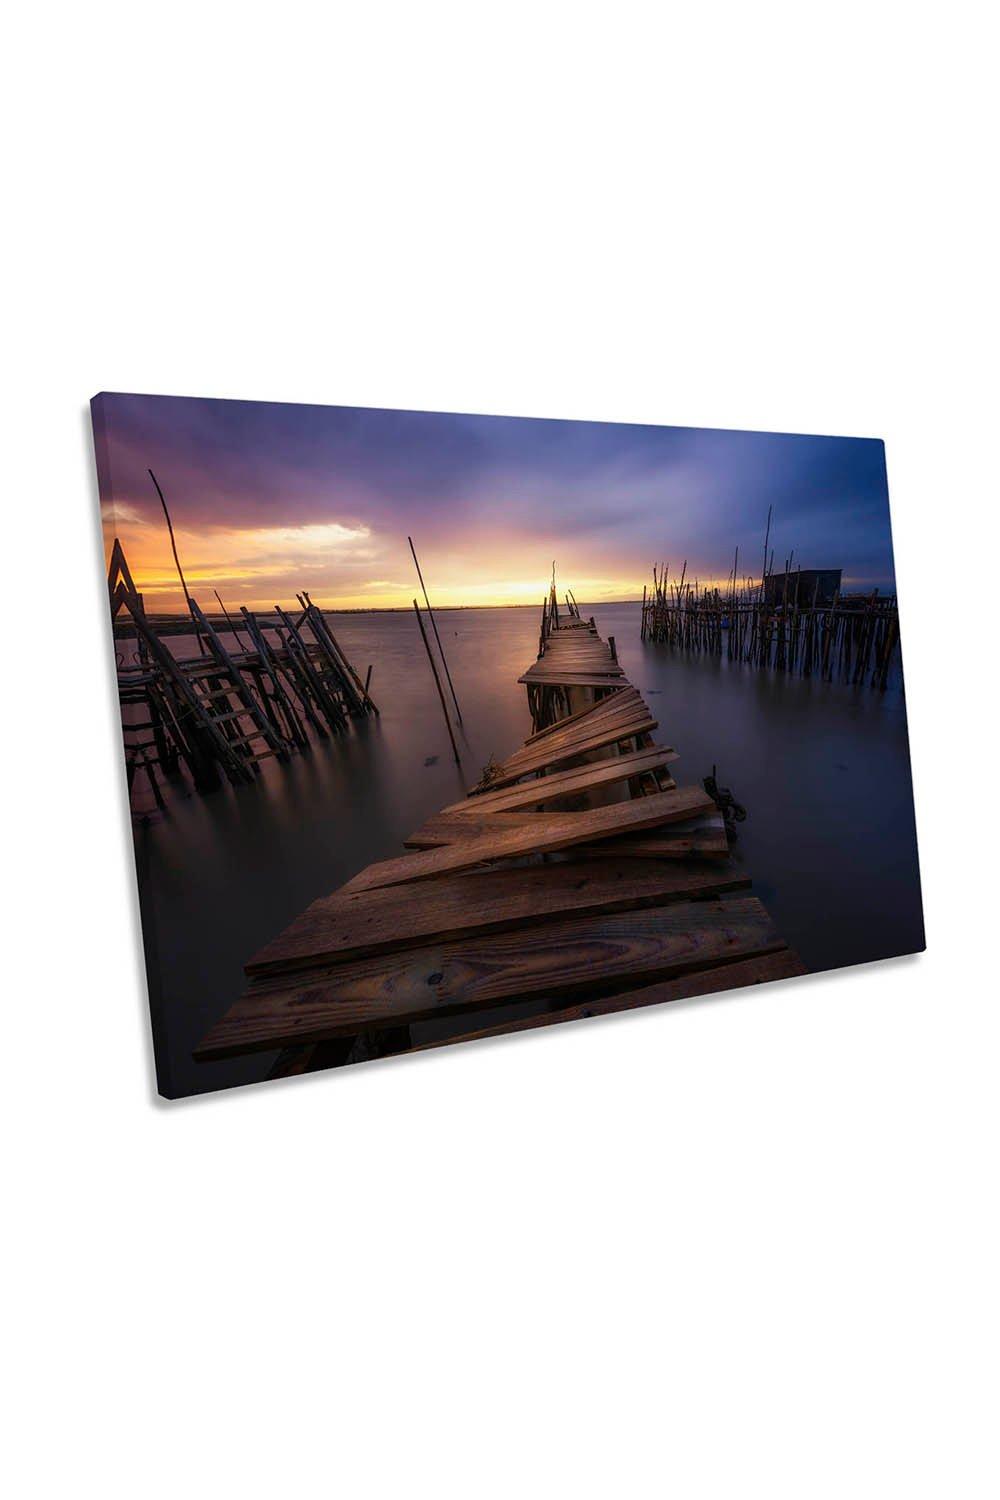 The End Carrasqueira Pier Portugal Canvas Wall Art Picture Print